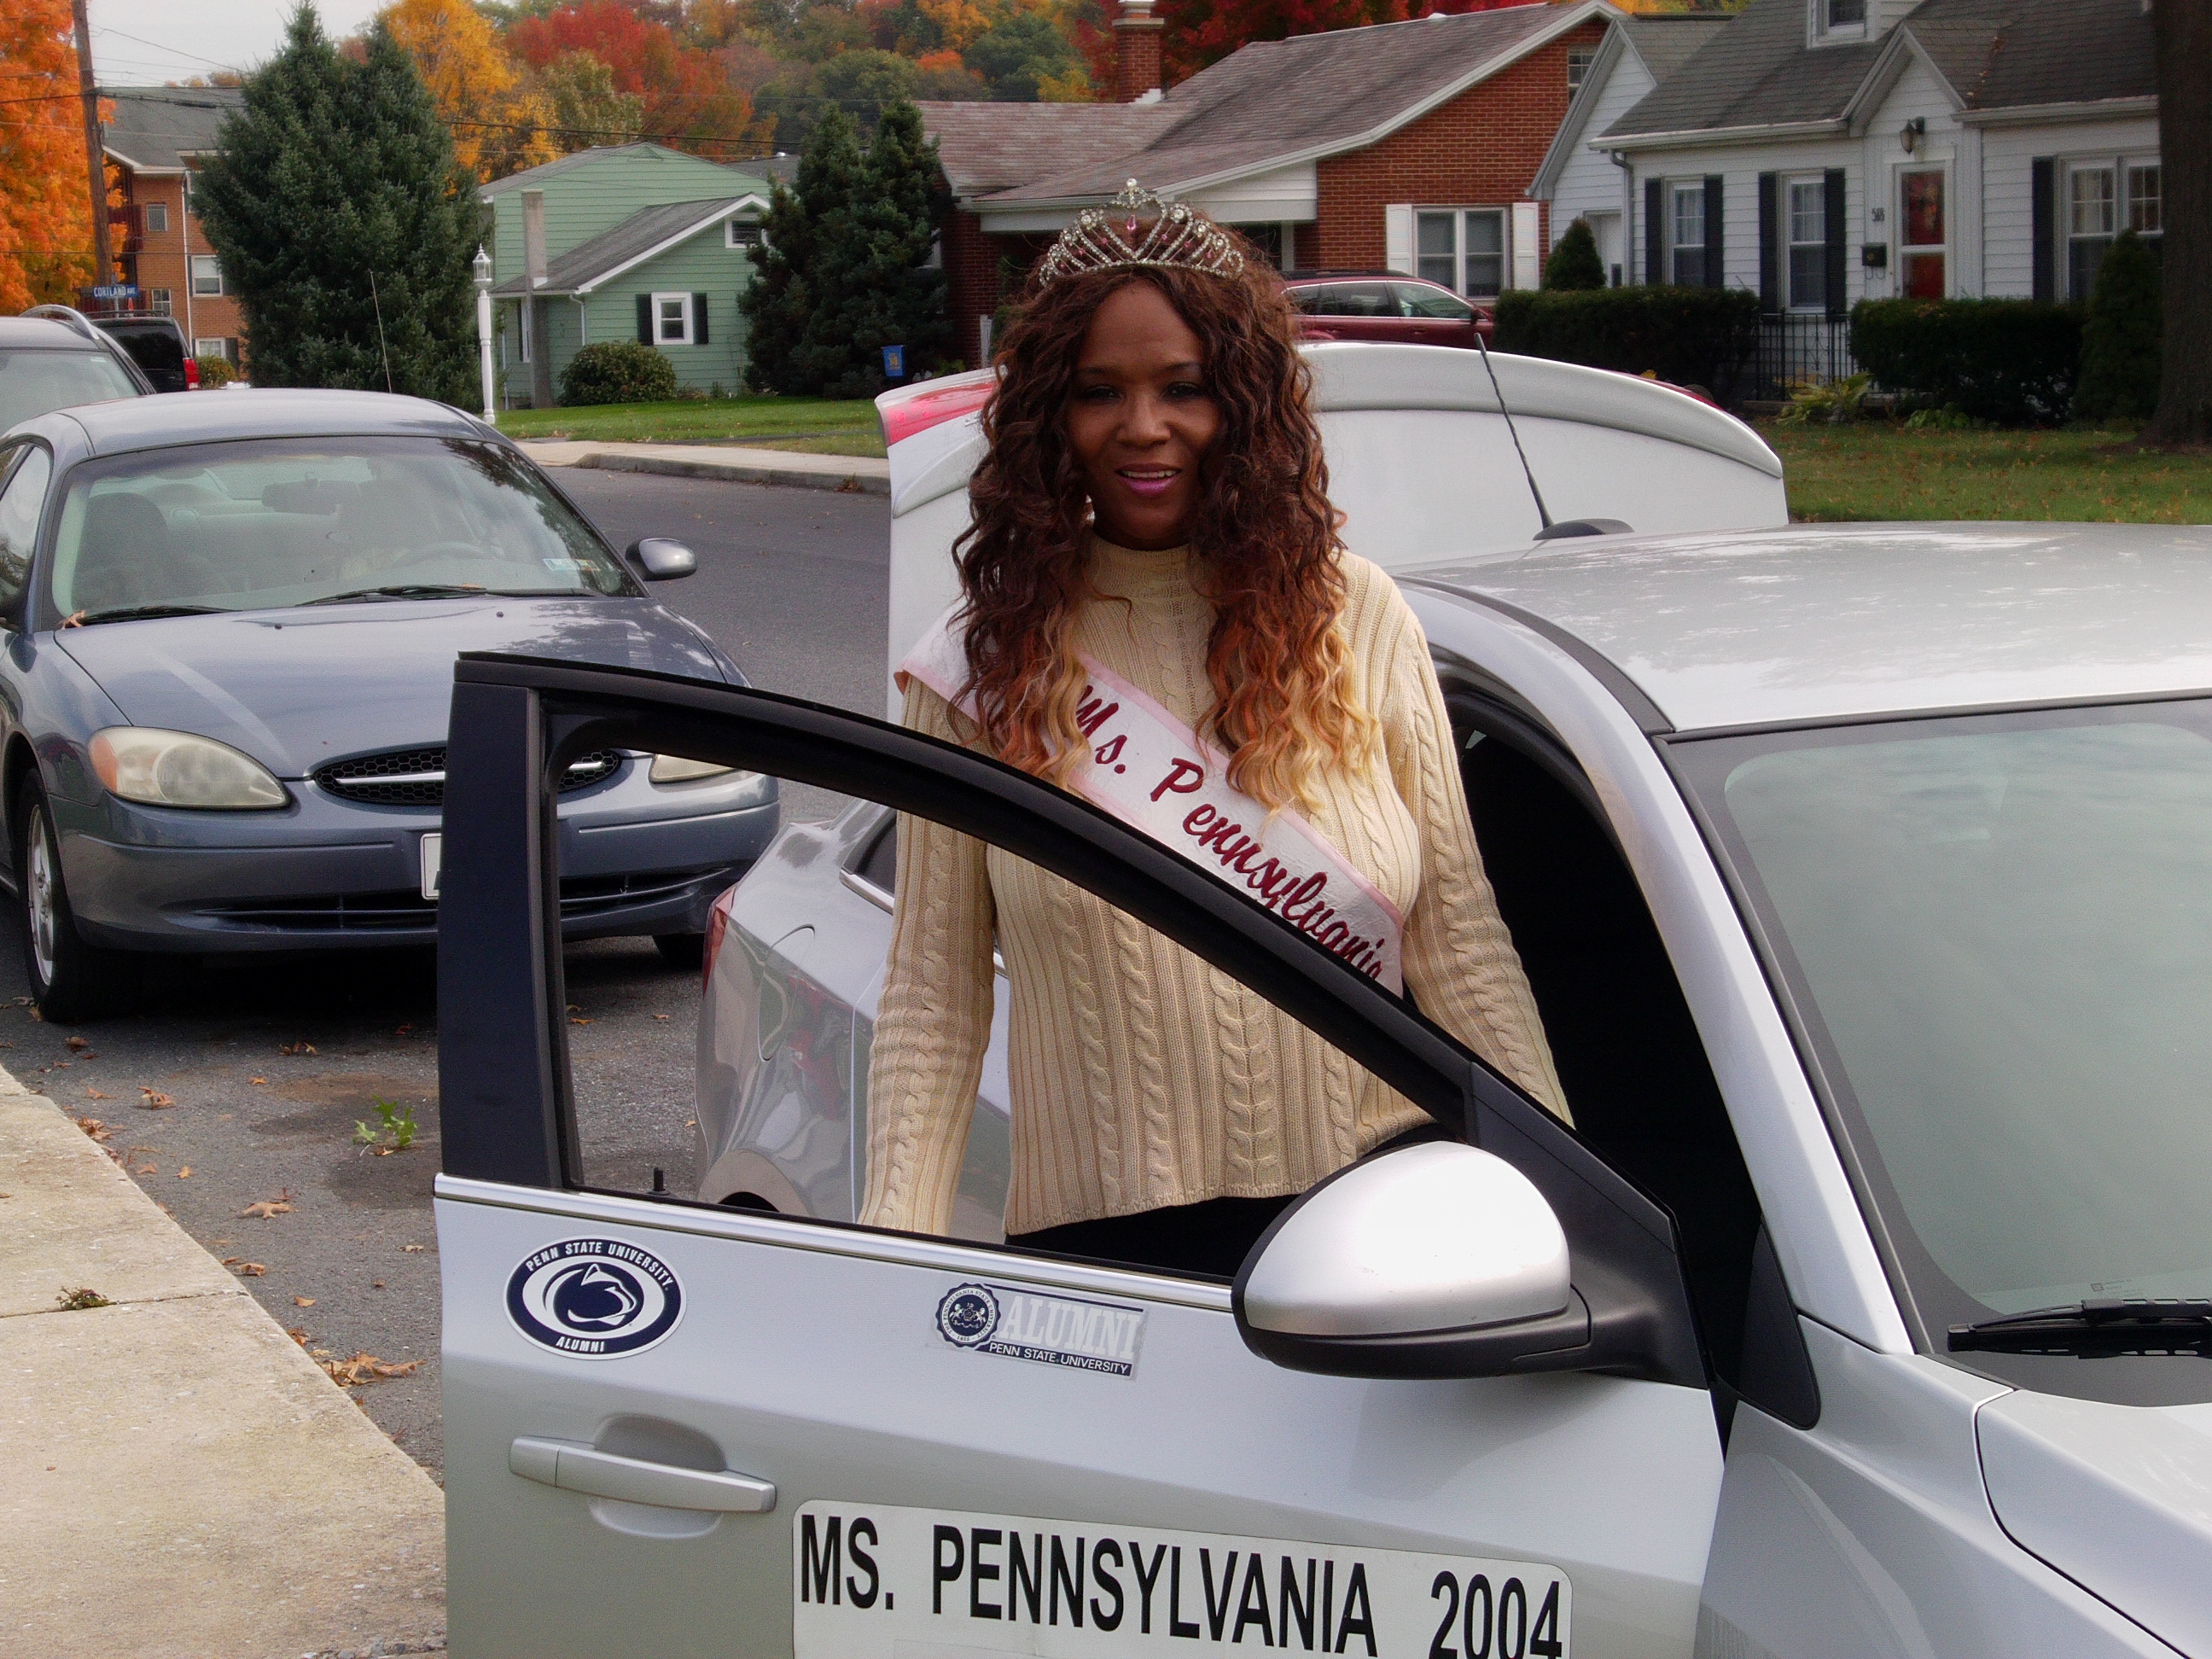 Ms.Pennsylvania 2004 Maria Frisby preparing to be in the 2015 Middletown Borough Homecoming Parade.